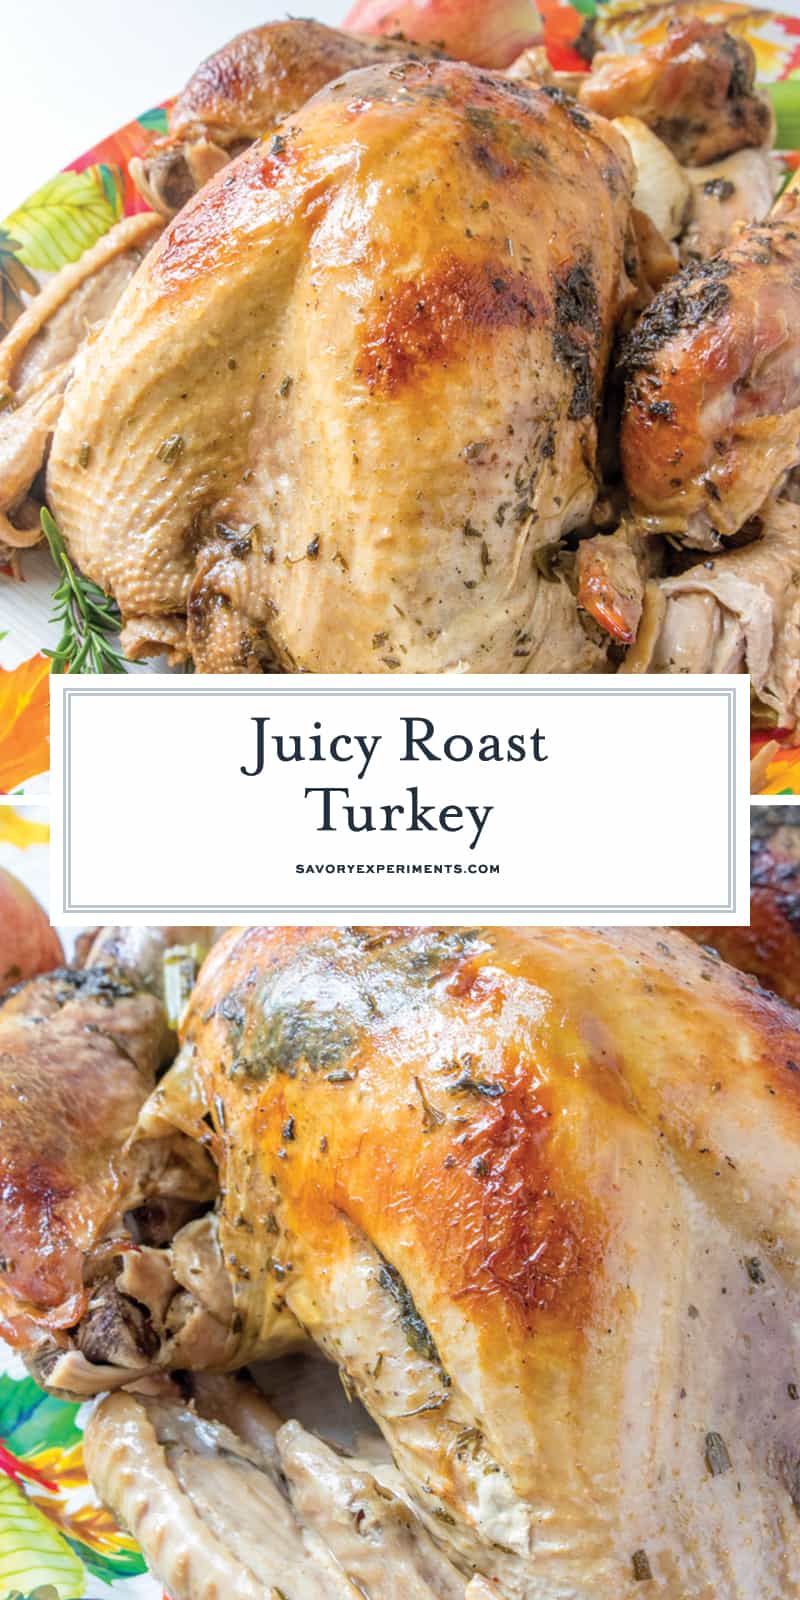 Juicy Roast Turkey is easier than you think with my buttery recipe, a bottle of bubbles and fresh herbs. The best juicy turkey recipe ever! #juicyroastturkey #bestturkeyrecipe #thanksgivingturkey www.savoryexperiments.com